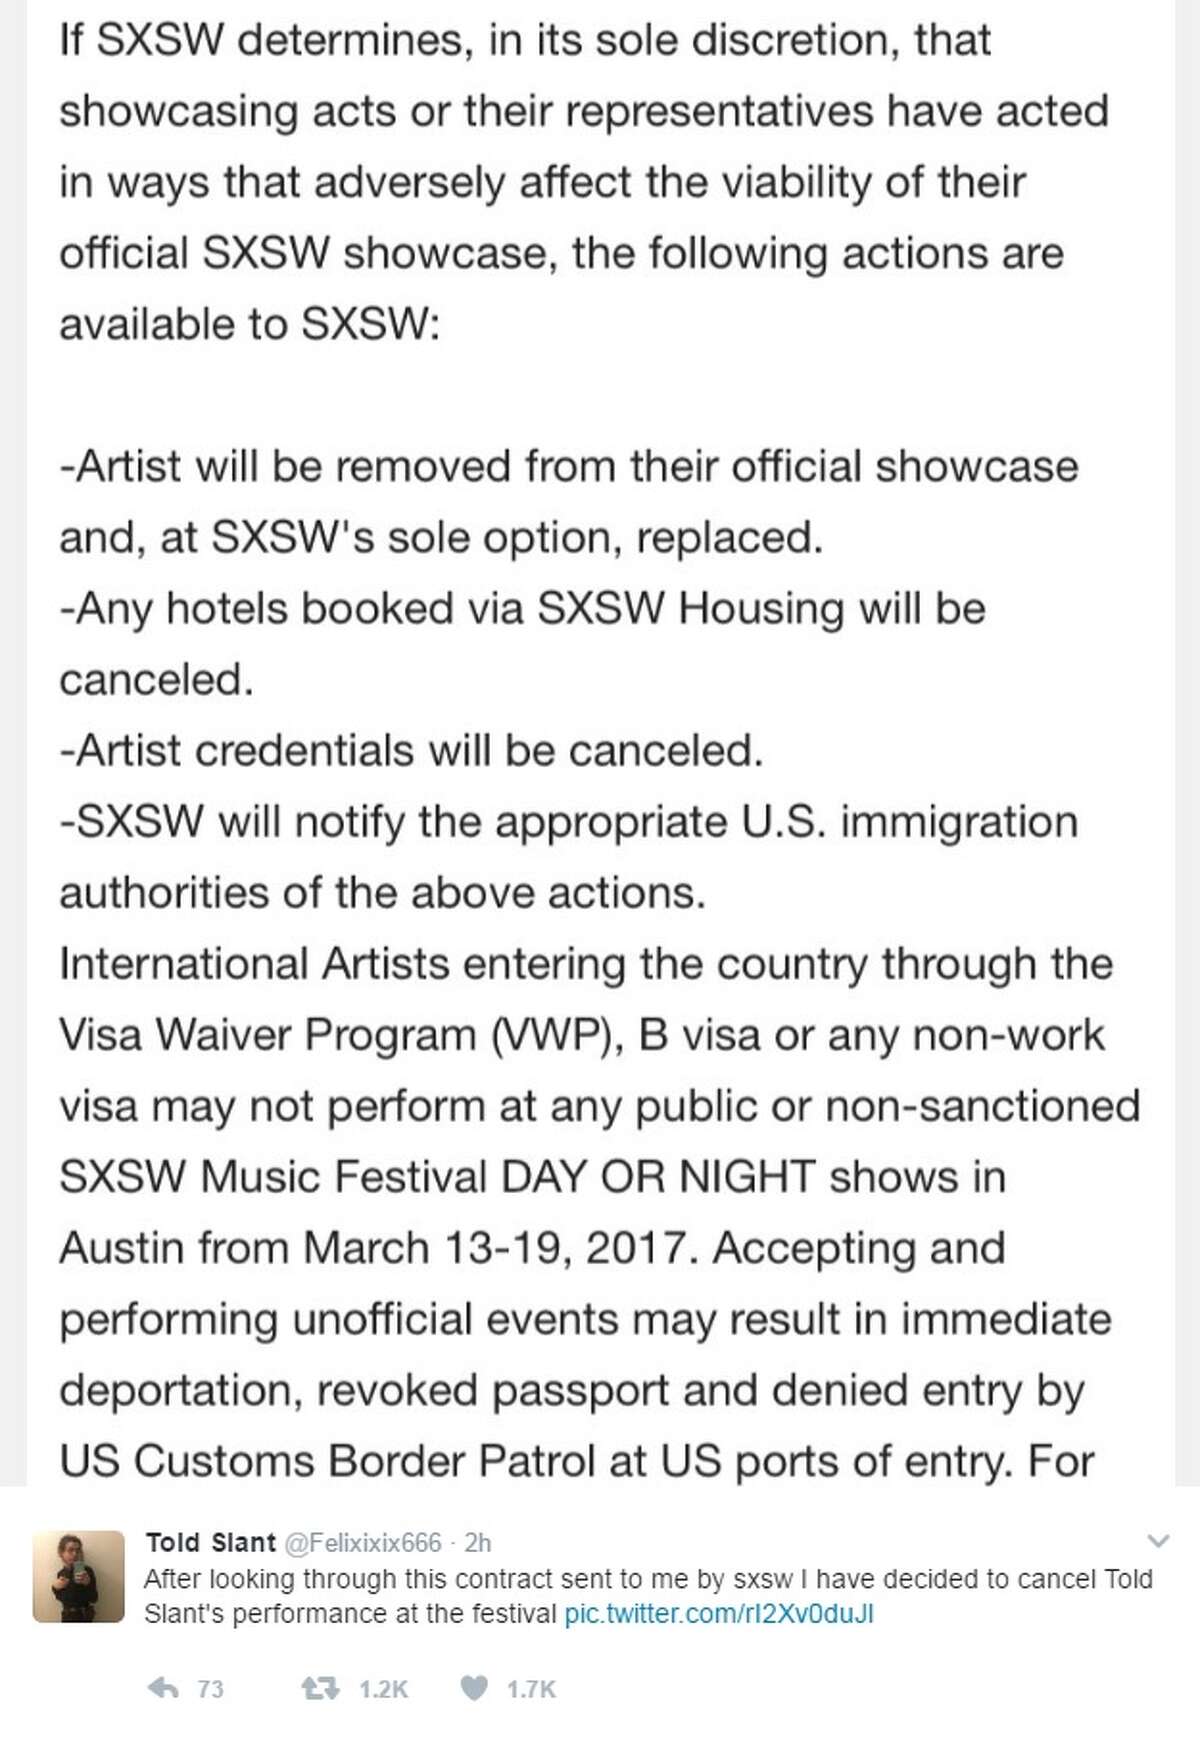 @Felixixix666: "After looking through this contract sent to me by sxsw I have decided to cancel Told Slant's performance at the festival"